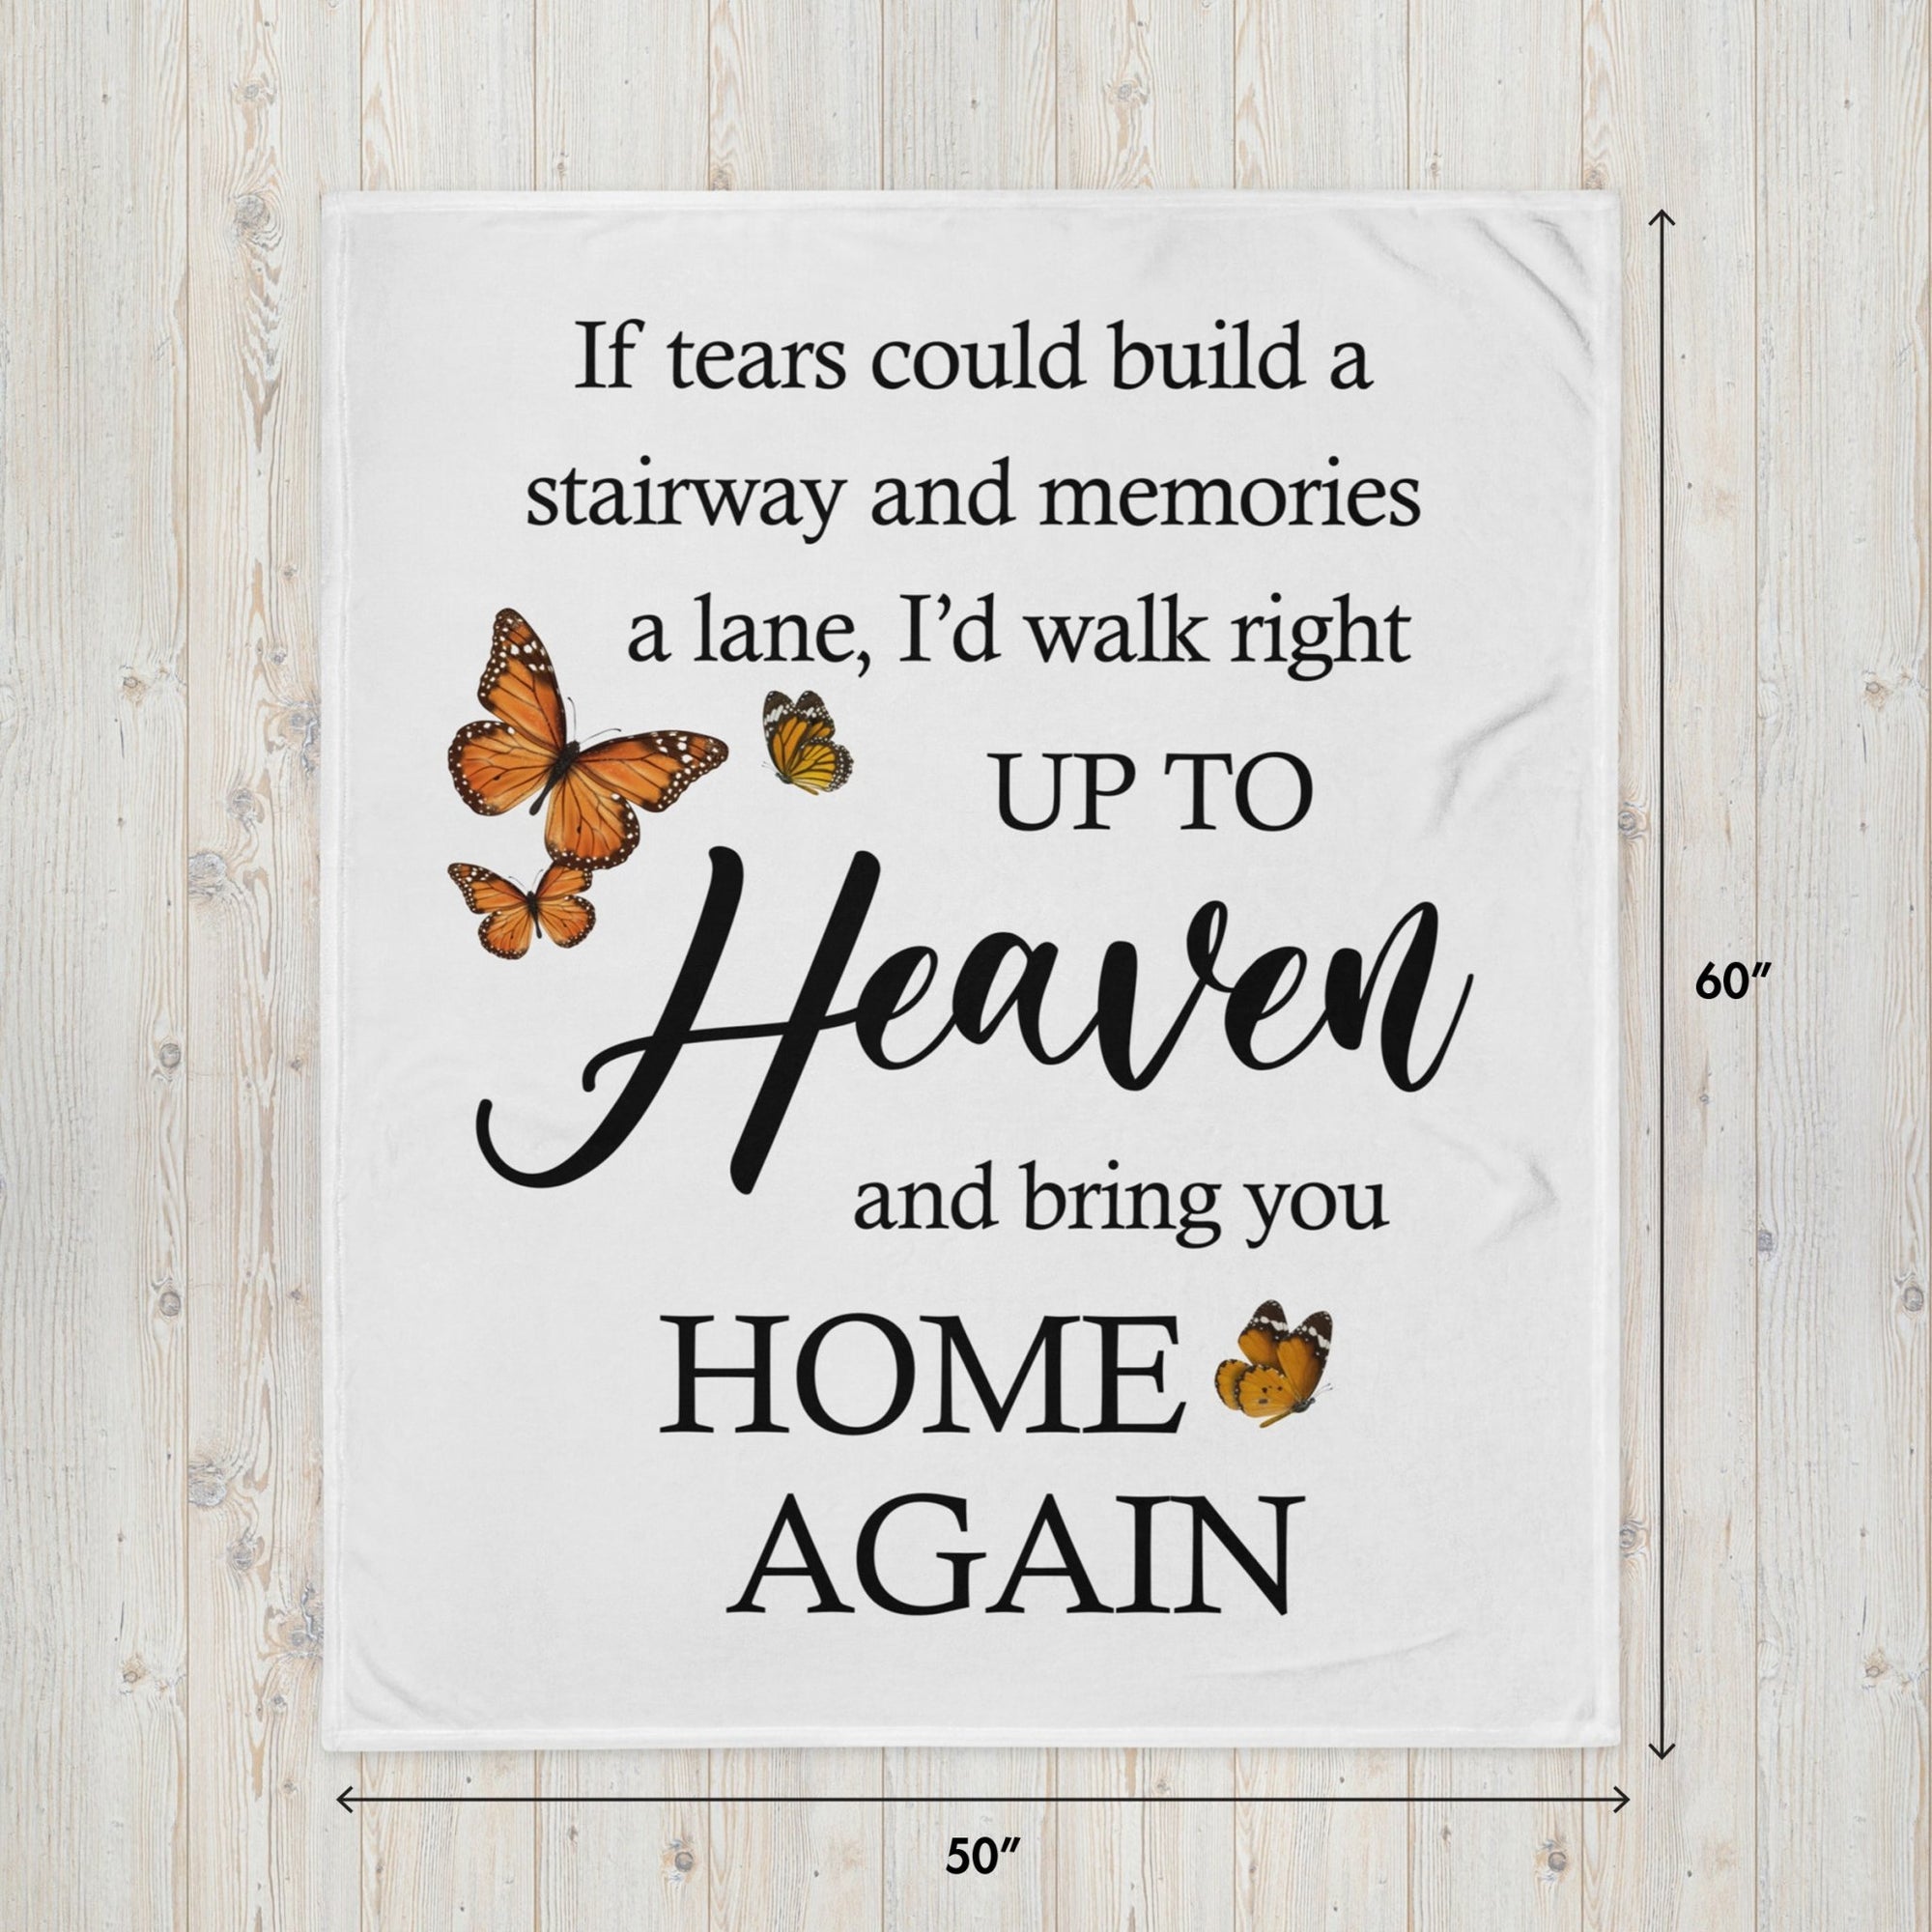 Memorial Decorative Throw Pillow Sympathy Gift & Home Decor Idea - If Tears Could Build a Stairway to Heaven